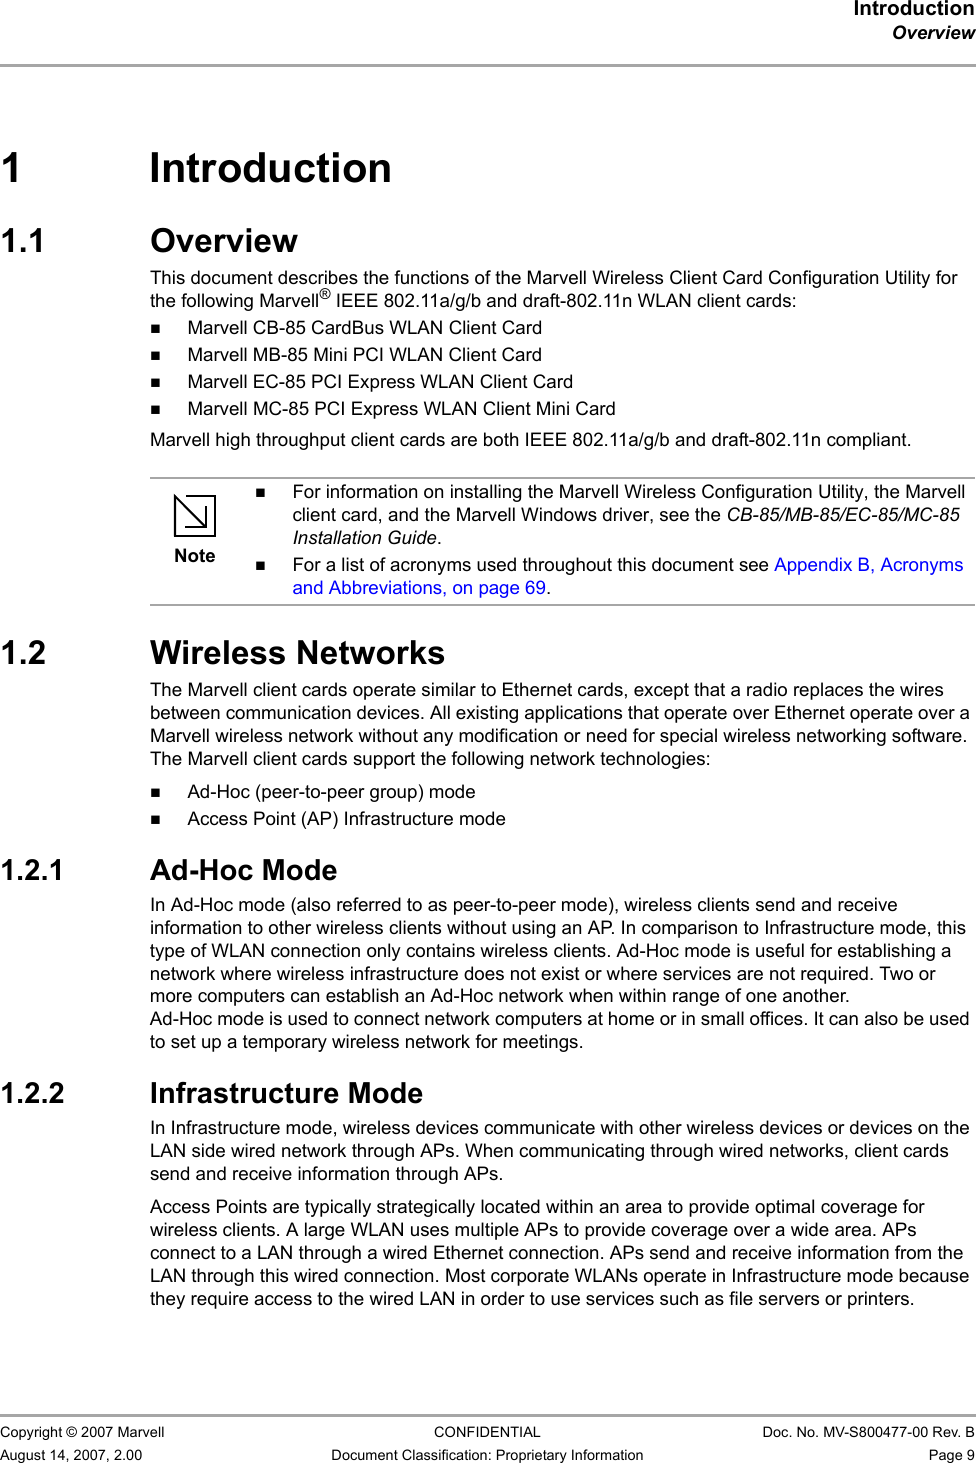 IntroductionOverview                         Copyright © 2007 Marvell CONFIDENTIAL Doc. No. MV-S800477-00 Rev. BAugust 14, 2007, 2.00 Document Classification: Proprietary Information Page 9 1 Introduction1.1 OverviewThis document describes the functions of the Marvell Wireless Client Card Configuration Utility for the following Marvell® IEEE 802.11a/g/b and draft-802.11n WLAN client cards:Marvell CB-85 CardBus WLAN Client CardMarvell MB-85 Mini PCI WLAN Client CardMarvell EC-85 PCI Express WLAN Client CardMarvell MC-85 PCI Express WLAN Client Mini CardMarvell high throughput client cards are both IEEE 802.11a/g/b and draft-802.11n compliant.1.2 Wireless NetworksThe Marvell client cards operate similar to Ethernet cards, except that a radio replaces the wires between communication devices. All existing applications that operate over Ethernet operate over a Marvell wireless network without any modification or need for special wireless networking software. The Marvell client cards support the following network technologies:Ad-Hoc (peer-to-peer group) modeAccess Point (AP) Infrastructure mode1.2.1 Ad-Hoc ModeIn Ad-Hoc mode (also referred to as peer-to-peer mode), wireless clients send and receive information to other wireless clients without using an AP. In comparison to Infrastructure mode, this type of WLAN connection only contains wireless clients. Ad-Hoc mode is useful for establishing a network where wireless infrastructure does not exist or where services are not required. Two or more computers can establish an Ad-Hoc network when within range of one another. Ad-Hoc mode is used to connect network computers at home or in small offices. It can also be used to set up a temporary wireless network for meetings.1.2.2 Infrastructure ModeIn Infrastructure mode, wireless devices communicate with other wireless devices or devices on the LAN side wired network through APs. When communicating through wired networks, client cards send and receive information through APs.Access Points are typically strategically located within an area to provide optimal coverage for wireless clients. A large WLAN uses multiple APs to provide coverage over a wide area. APs connect to a LAN through a wired Ethernet connection. APs send and receive information from the LAN through this wired connection. Most corporate WLANs operate in Infrastructure mode because they require access to the wired LAN in order to use services such as file servers or printers.NoteFor information on installing the Marvell Wireless Configuration Utility, the Marvell client card, and the Marvell Windows driver, see the CB-85/MB-85/EC-85/MC-85 Installation Guide.For a list of acronyms used throughout this document see Appendix B, Acronyms and Abbreviations, on page 69.